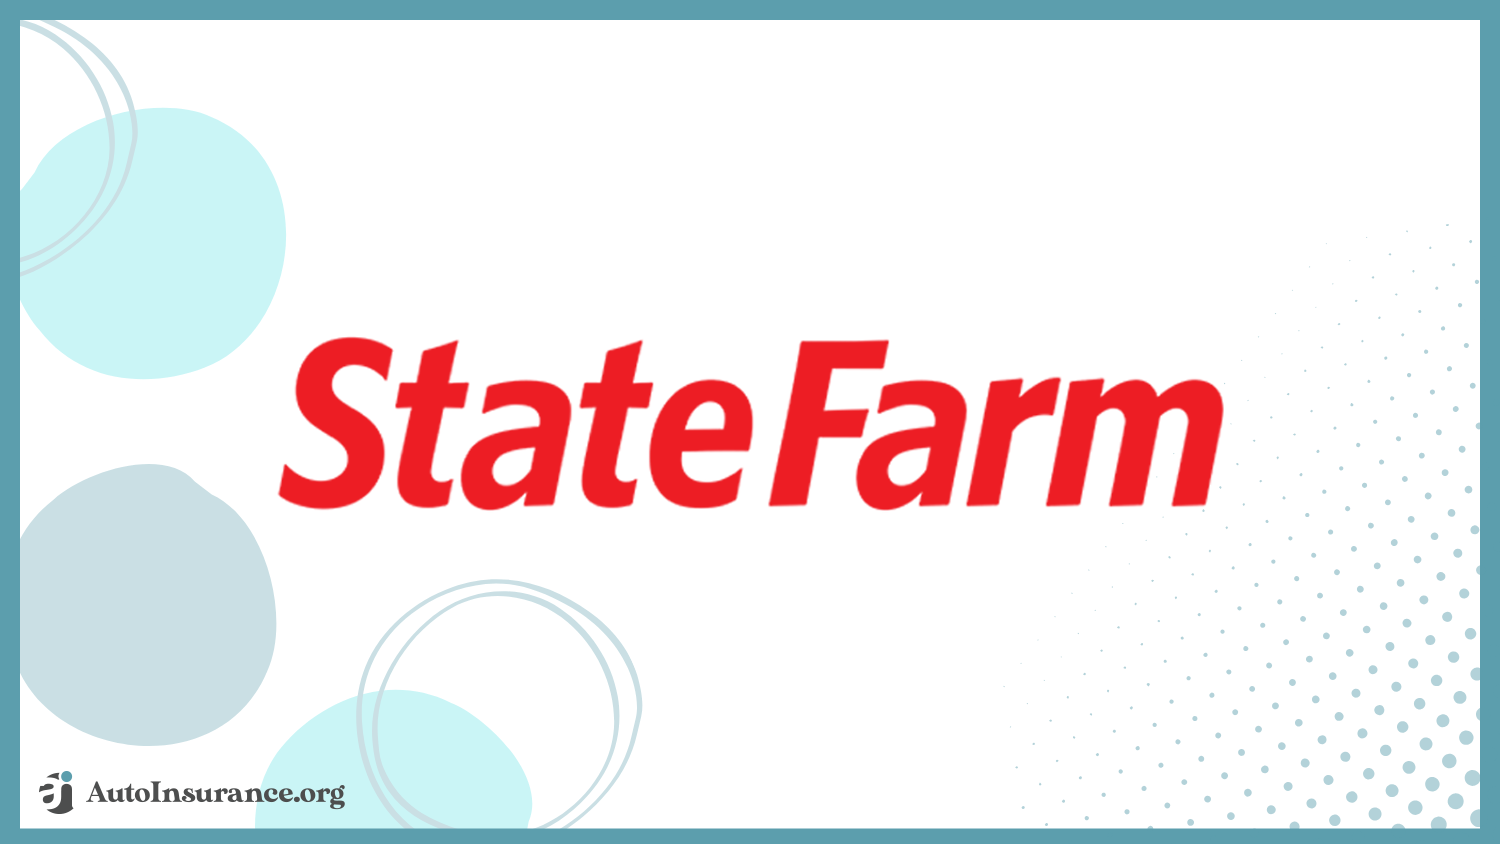 State Farm: Best Auto Insurance Companies for Drivers With Bad Credit